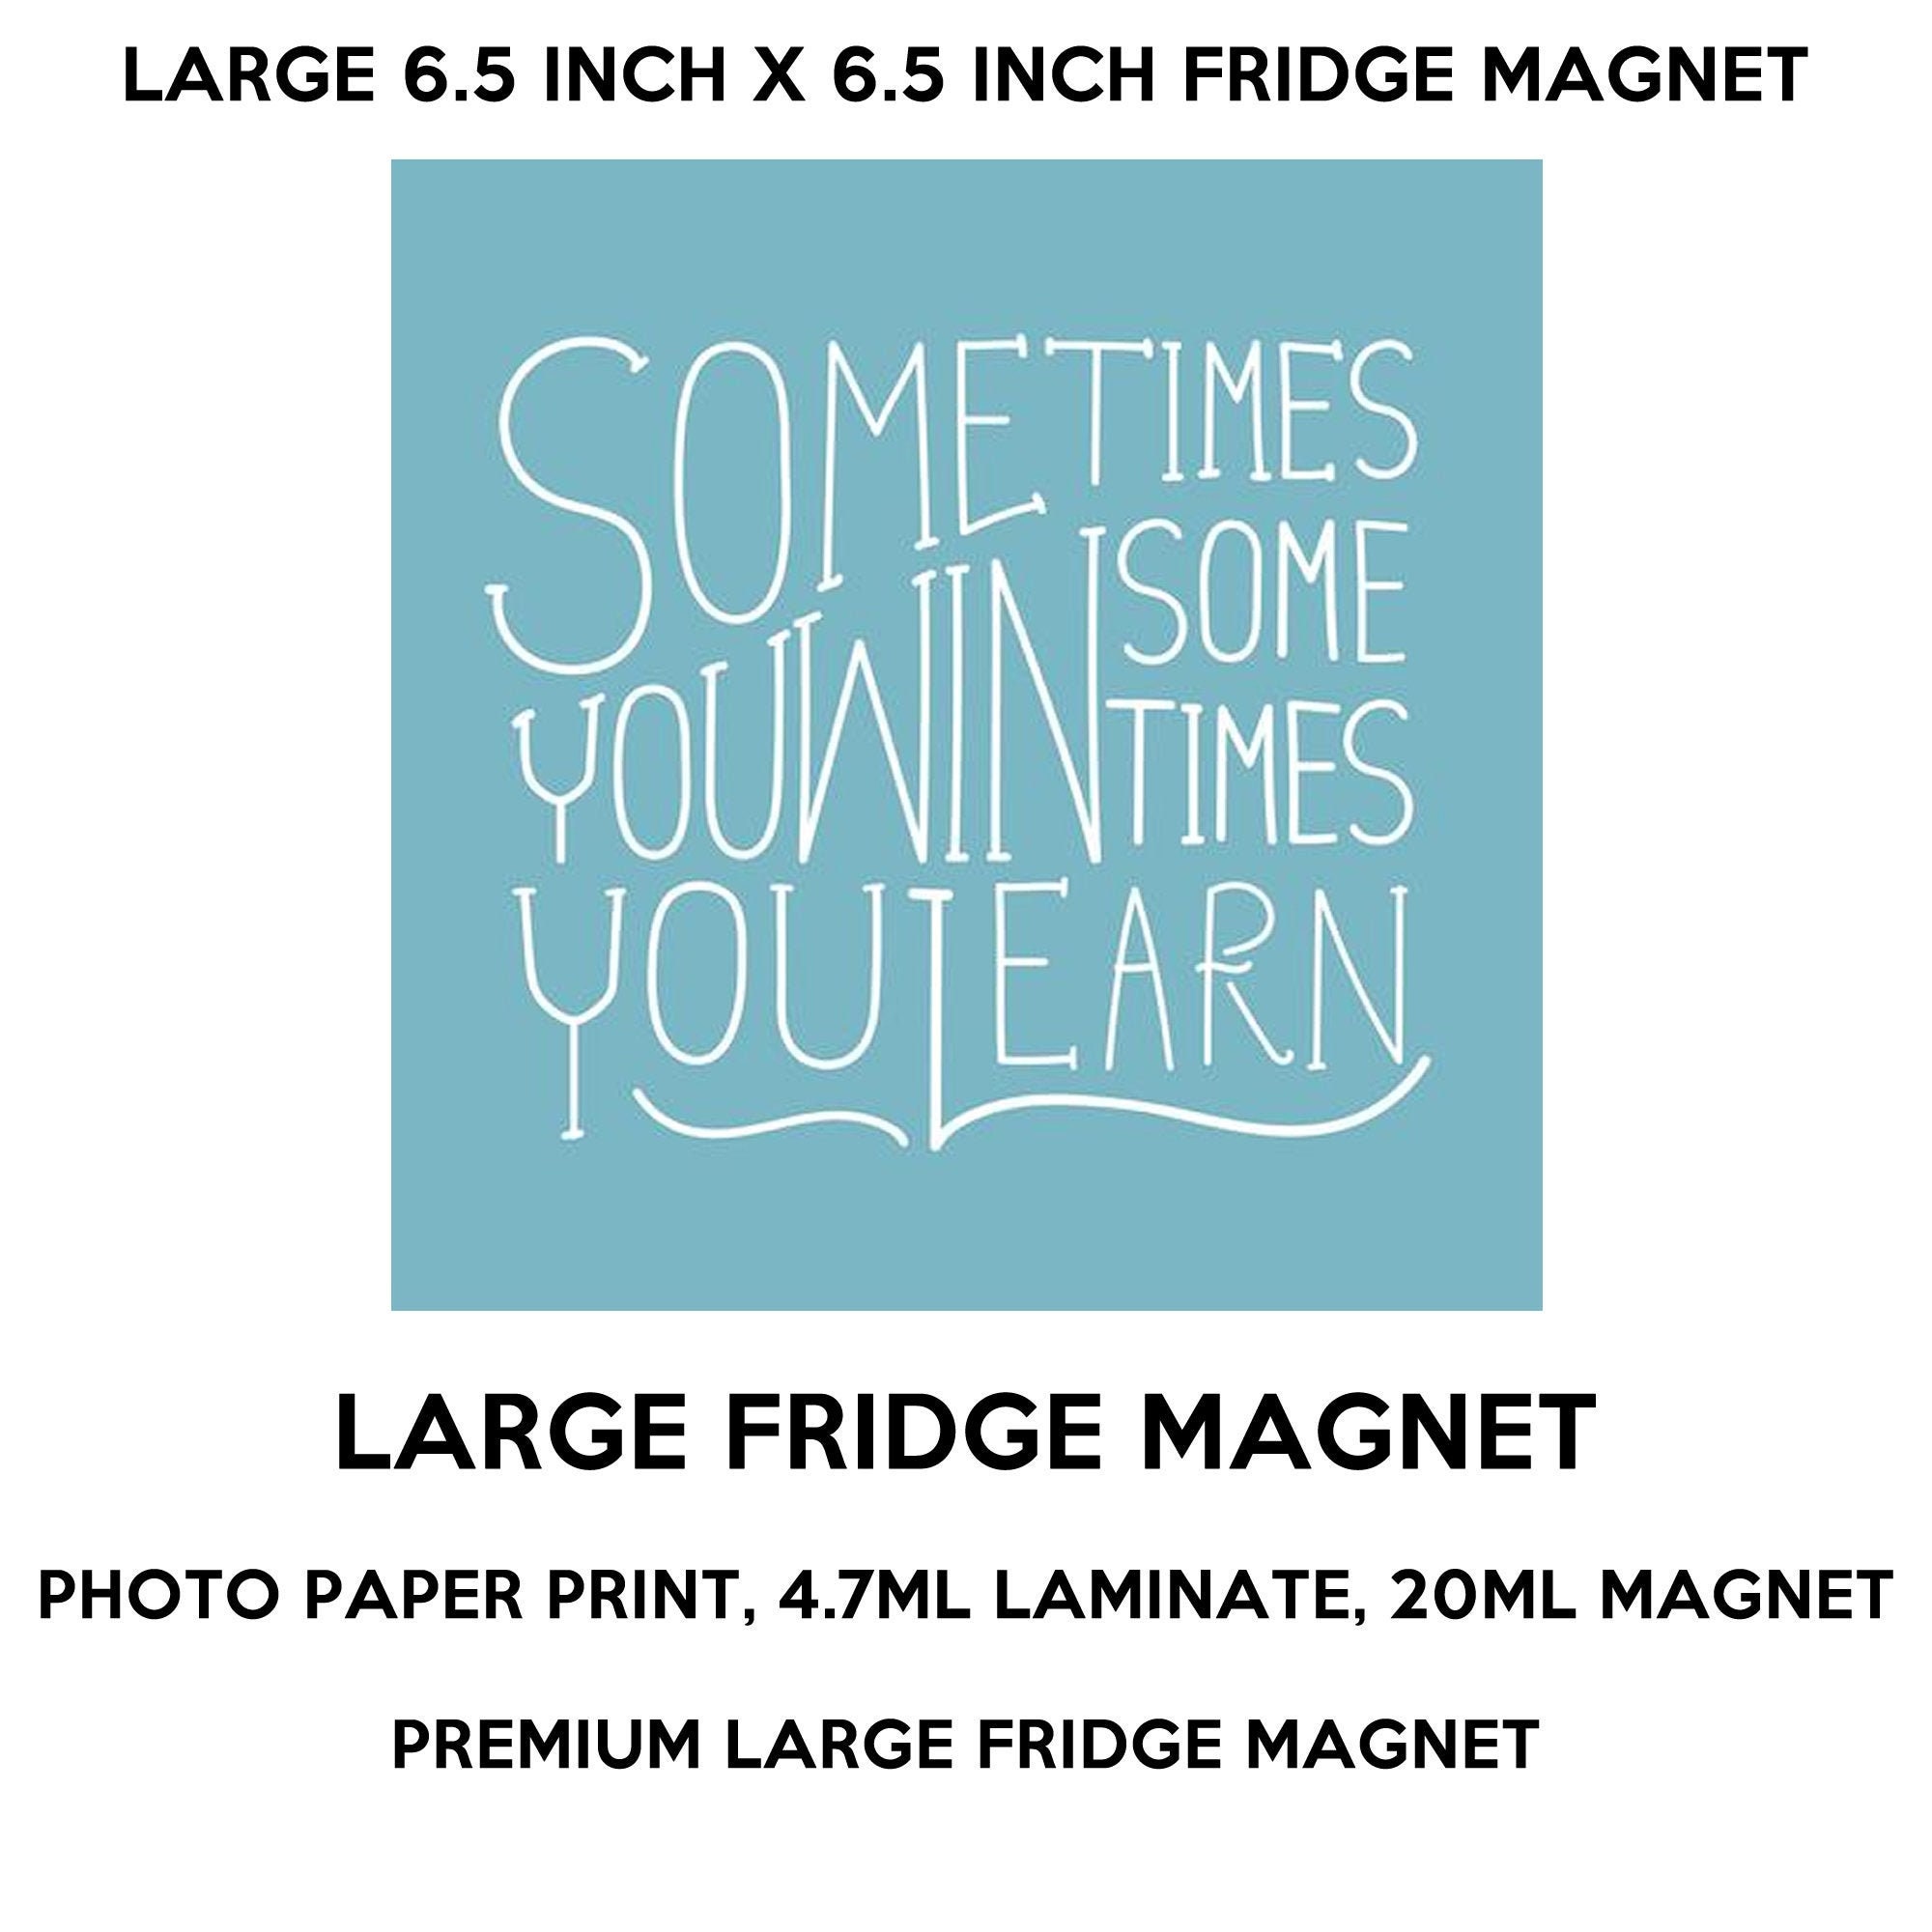 Sometimes you win sometimes you learn fridge magnet, large 6 1/2 x 6 1/2 inch premium fridge magnet that stands out.